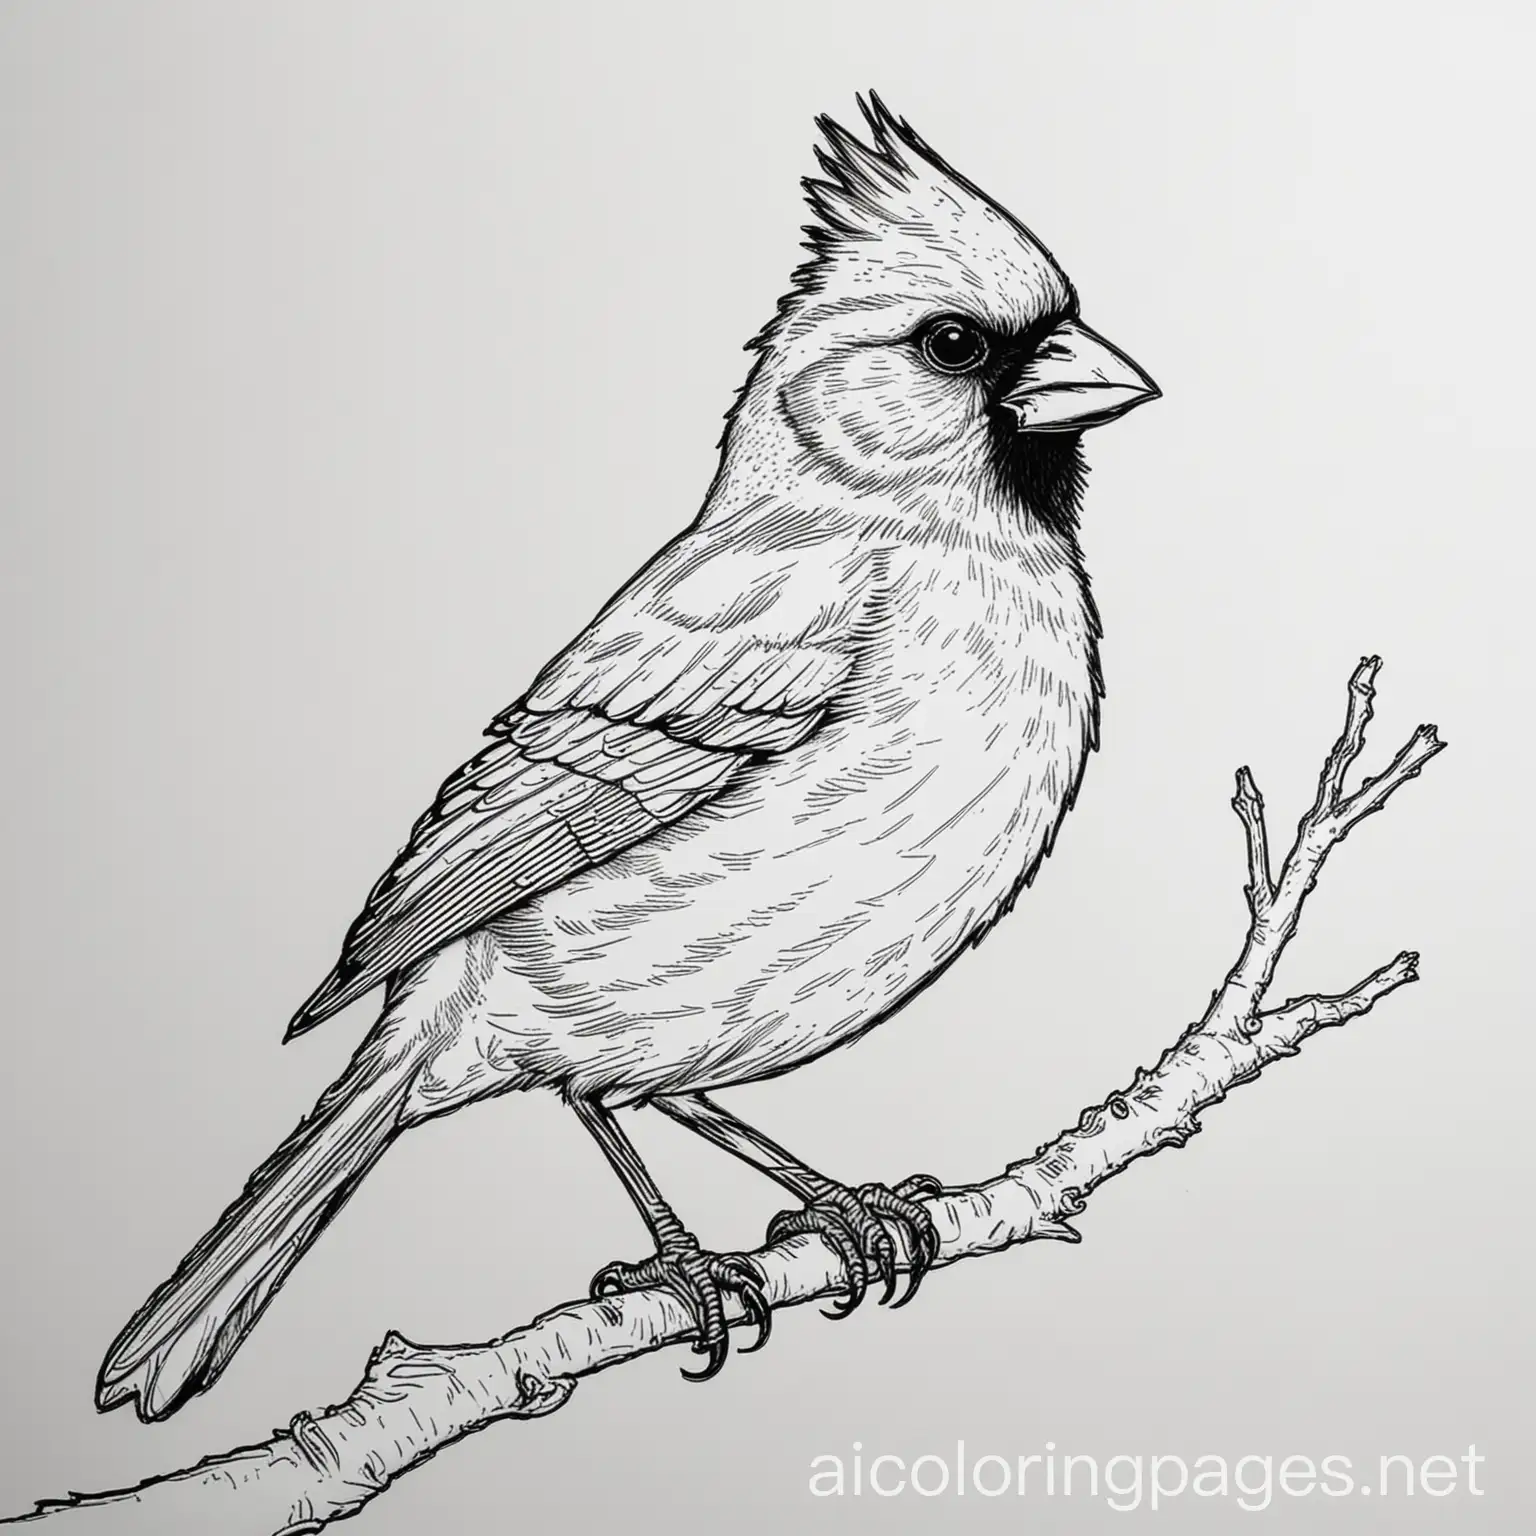 Simplicity-in-Cardinal-Coloring-Page-on-White-Background